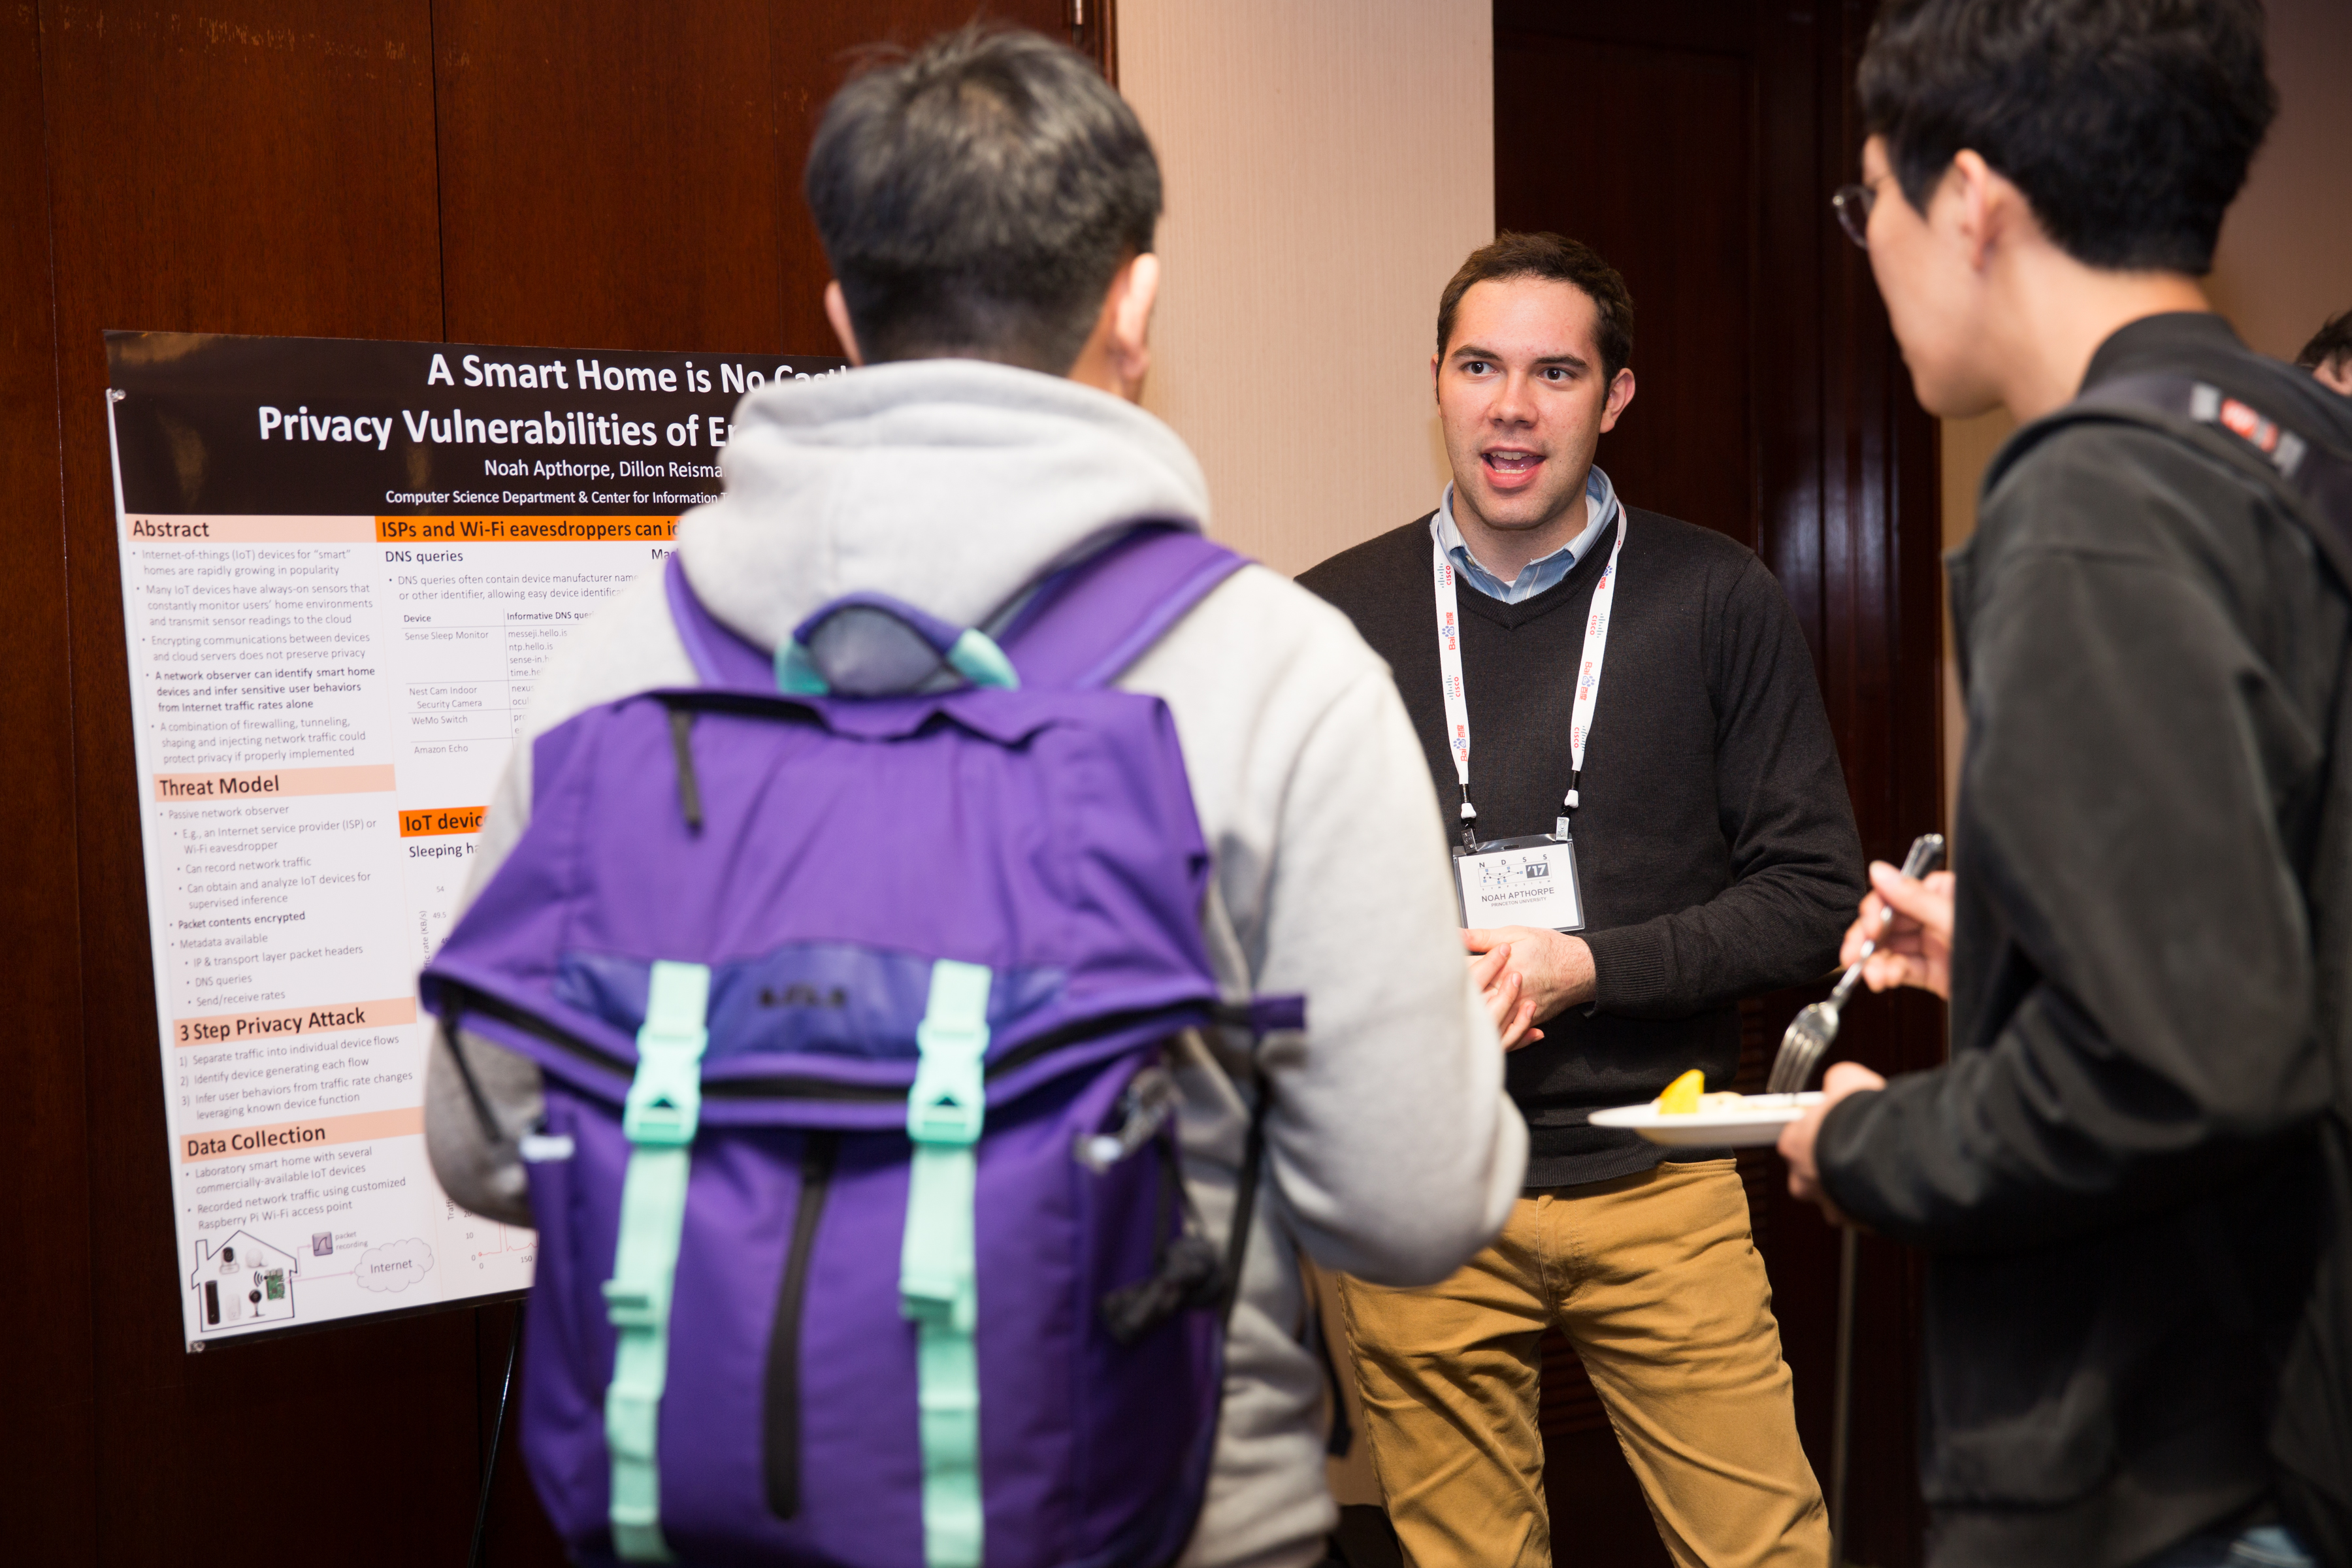 Presenting a poster of his work “A Smart Home is No Castle: Privacy Vulnerabilities of Encrypted IoT Traffic,” at the Network and Distributed System Security Symposium (NDSS).